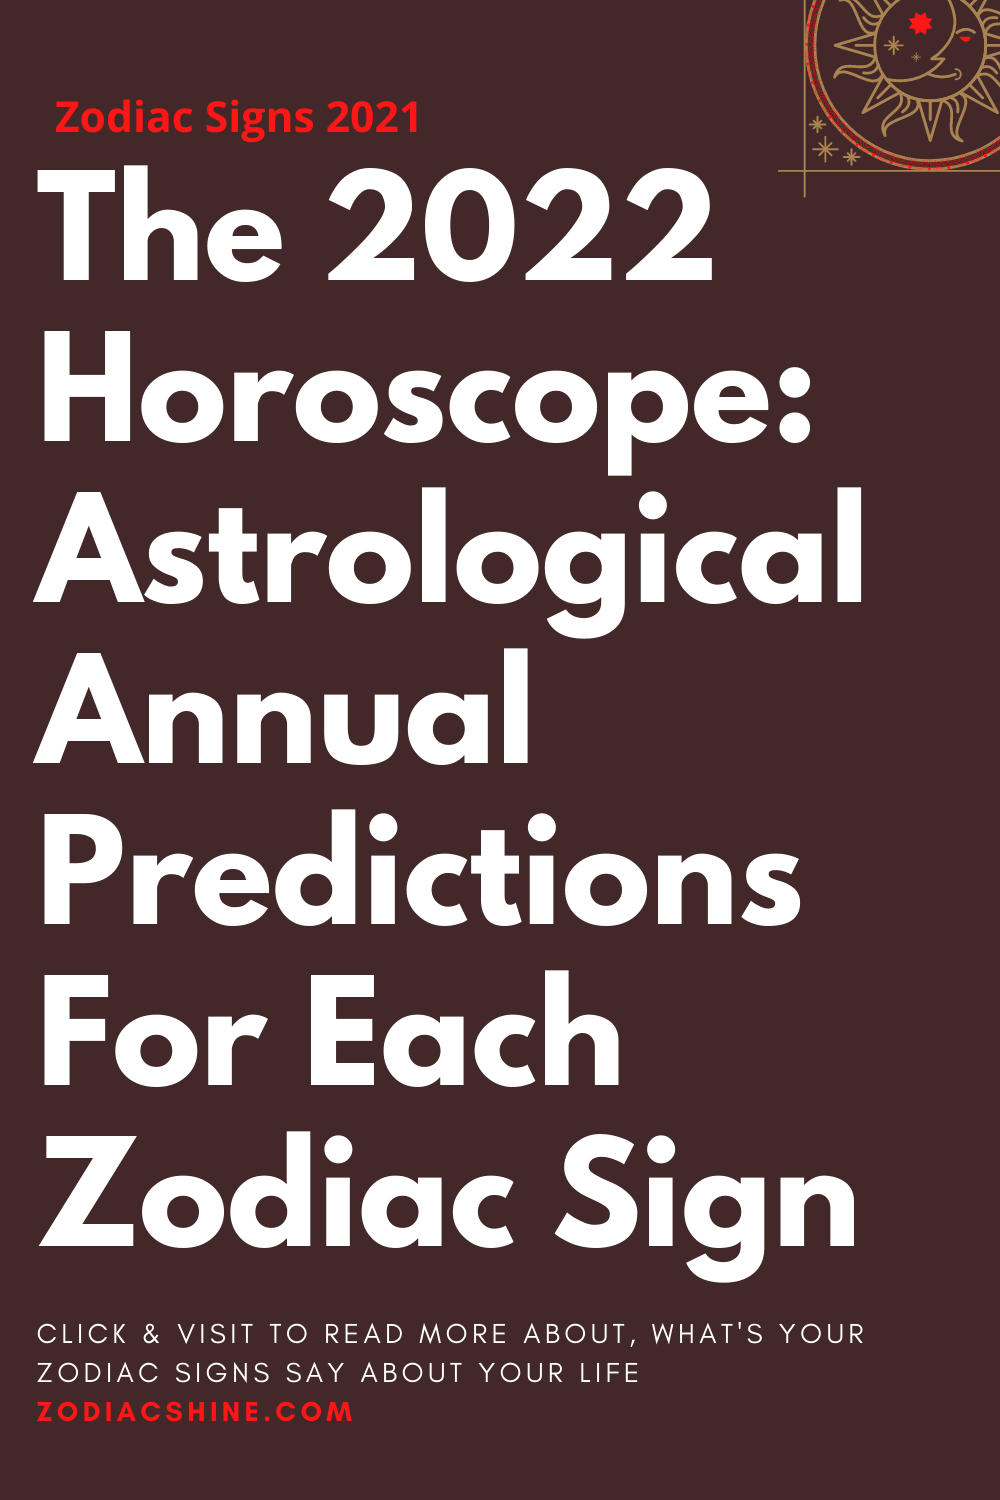 The 2022 Horoscope: Astrological Annual Predictions For Each Zodiac Sign